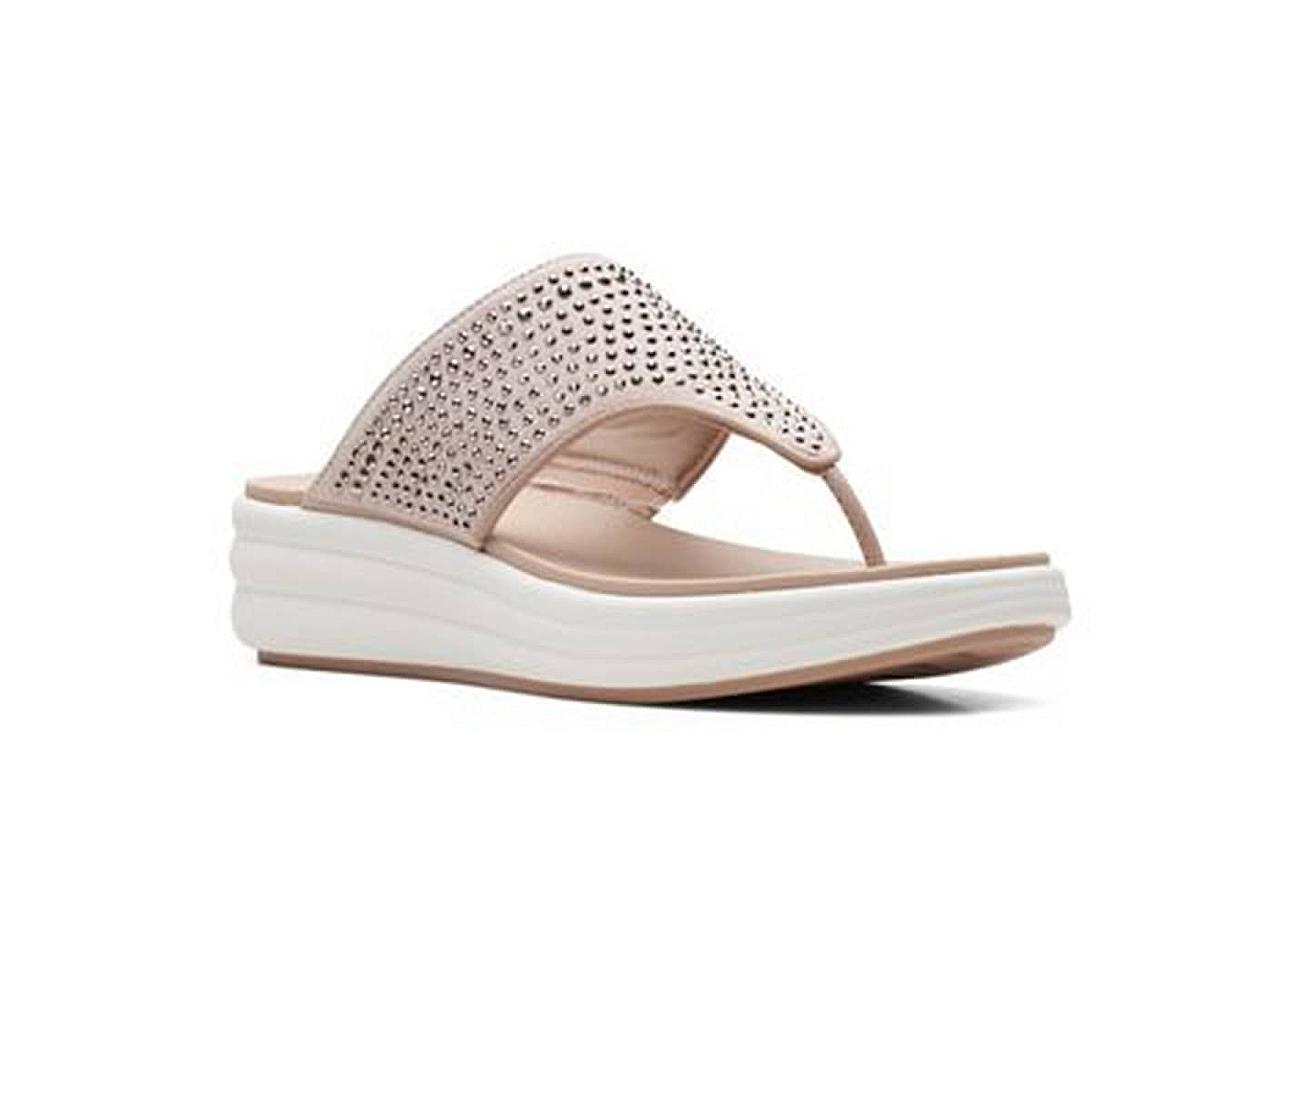 Clothing & Shoes - Shoes - Sandals - Clarks Rose Way Wedge Sandal - Online  Shopping for Canadians